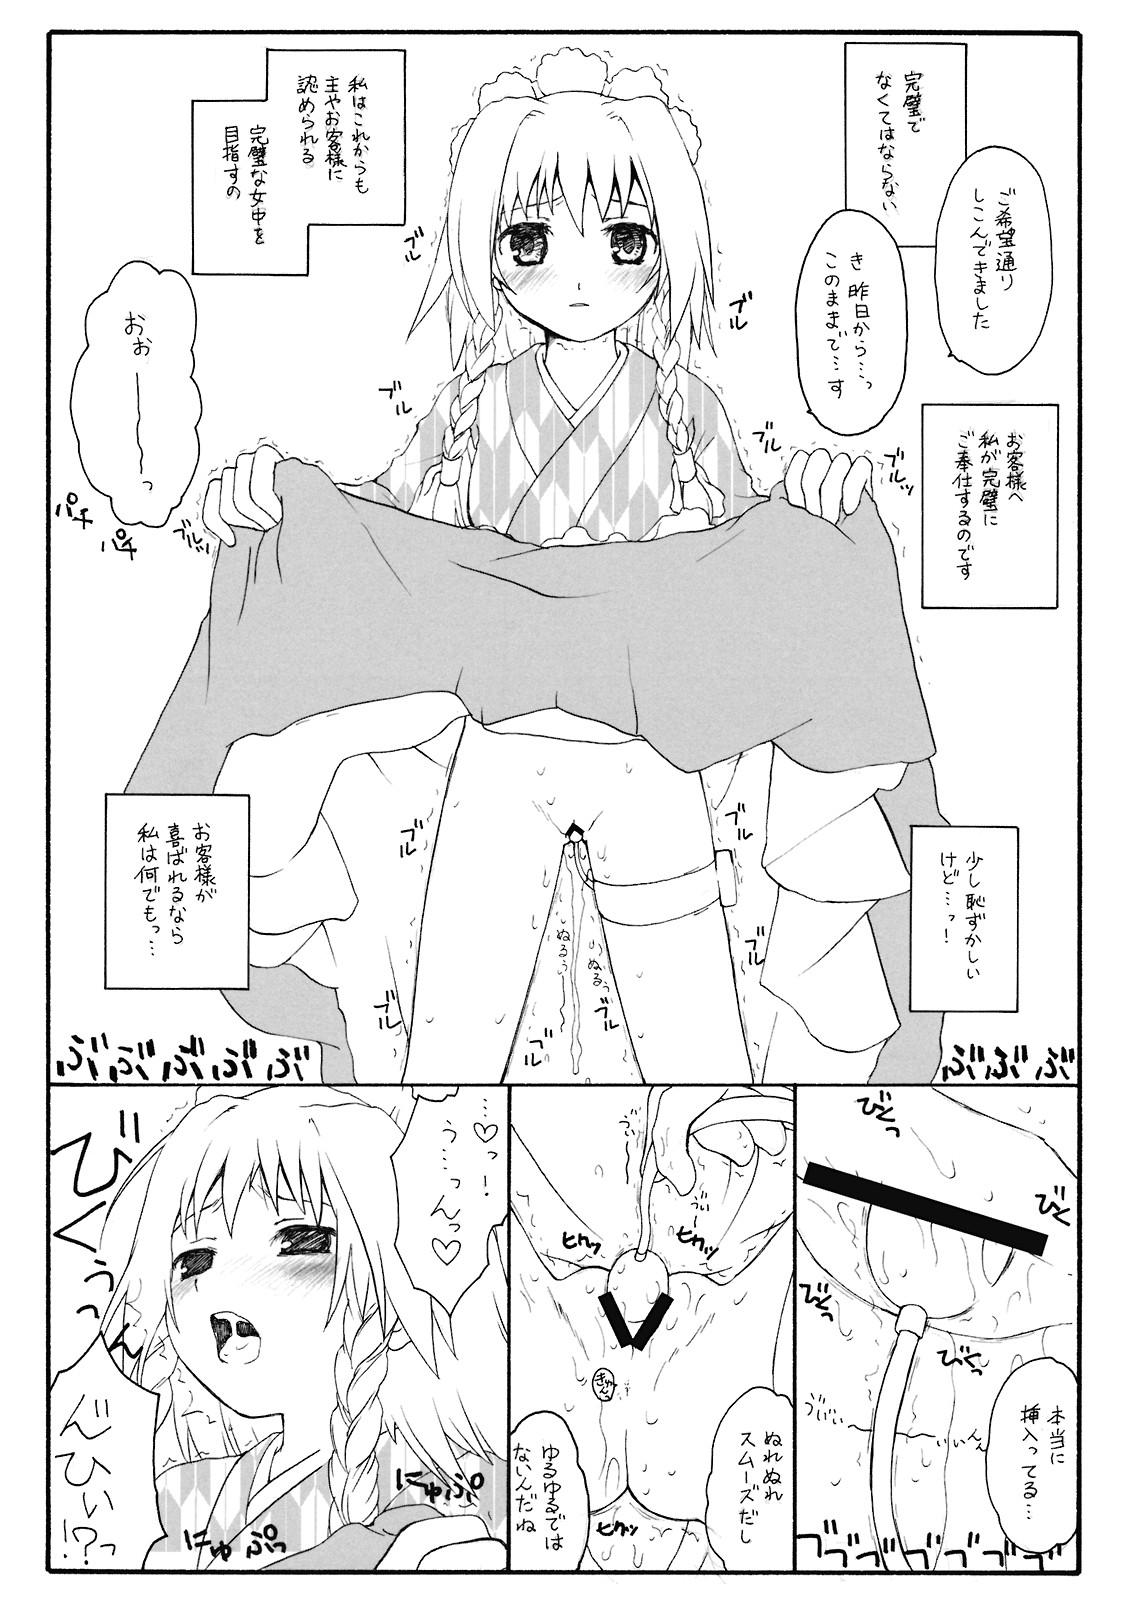 Spooning Aru Omise no Ichinichi Sono 4 - Touhou project Gay Party - Page 6